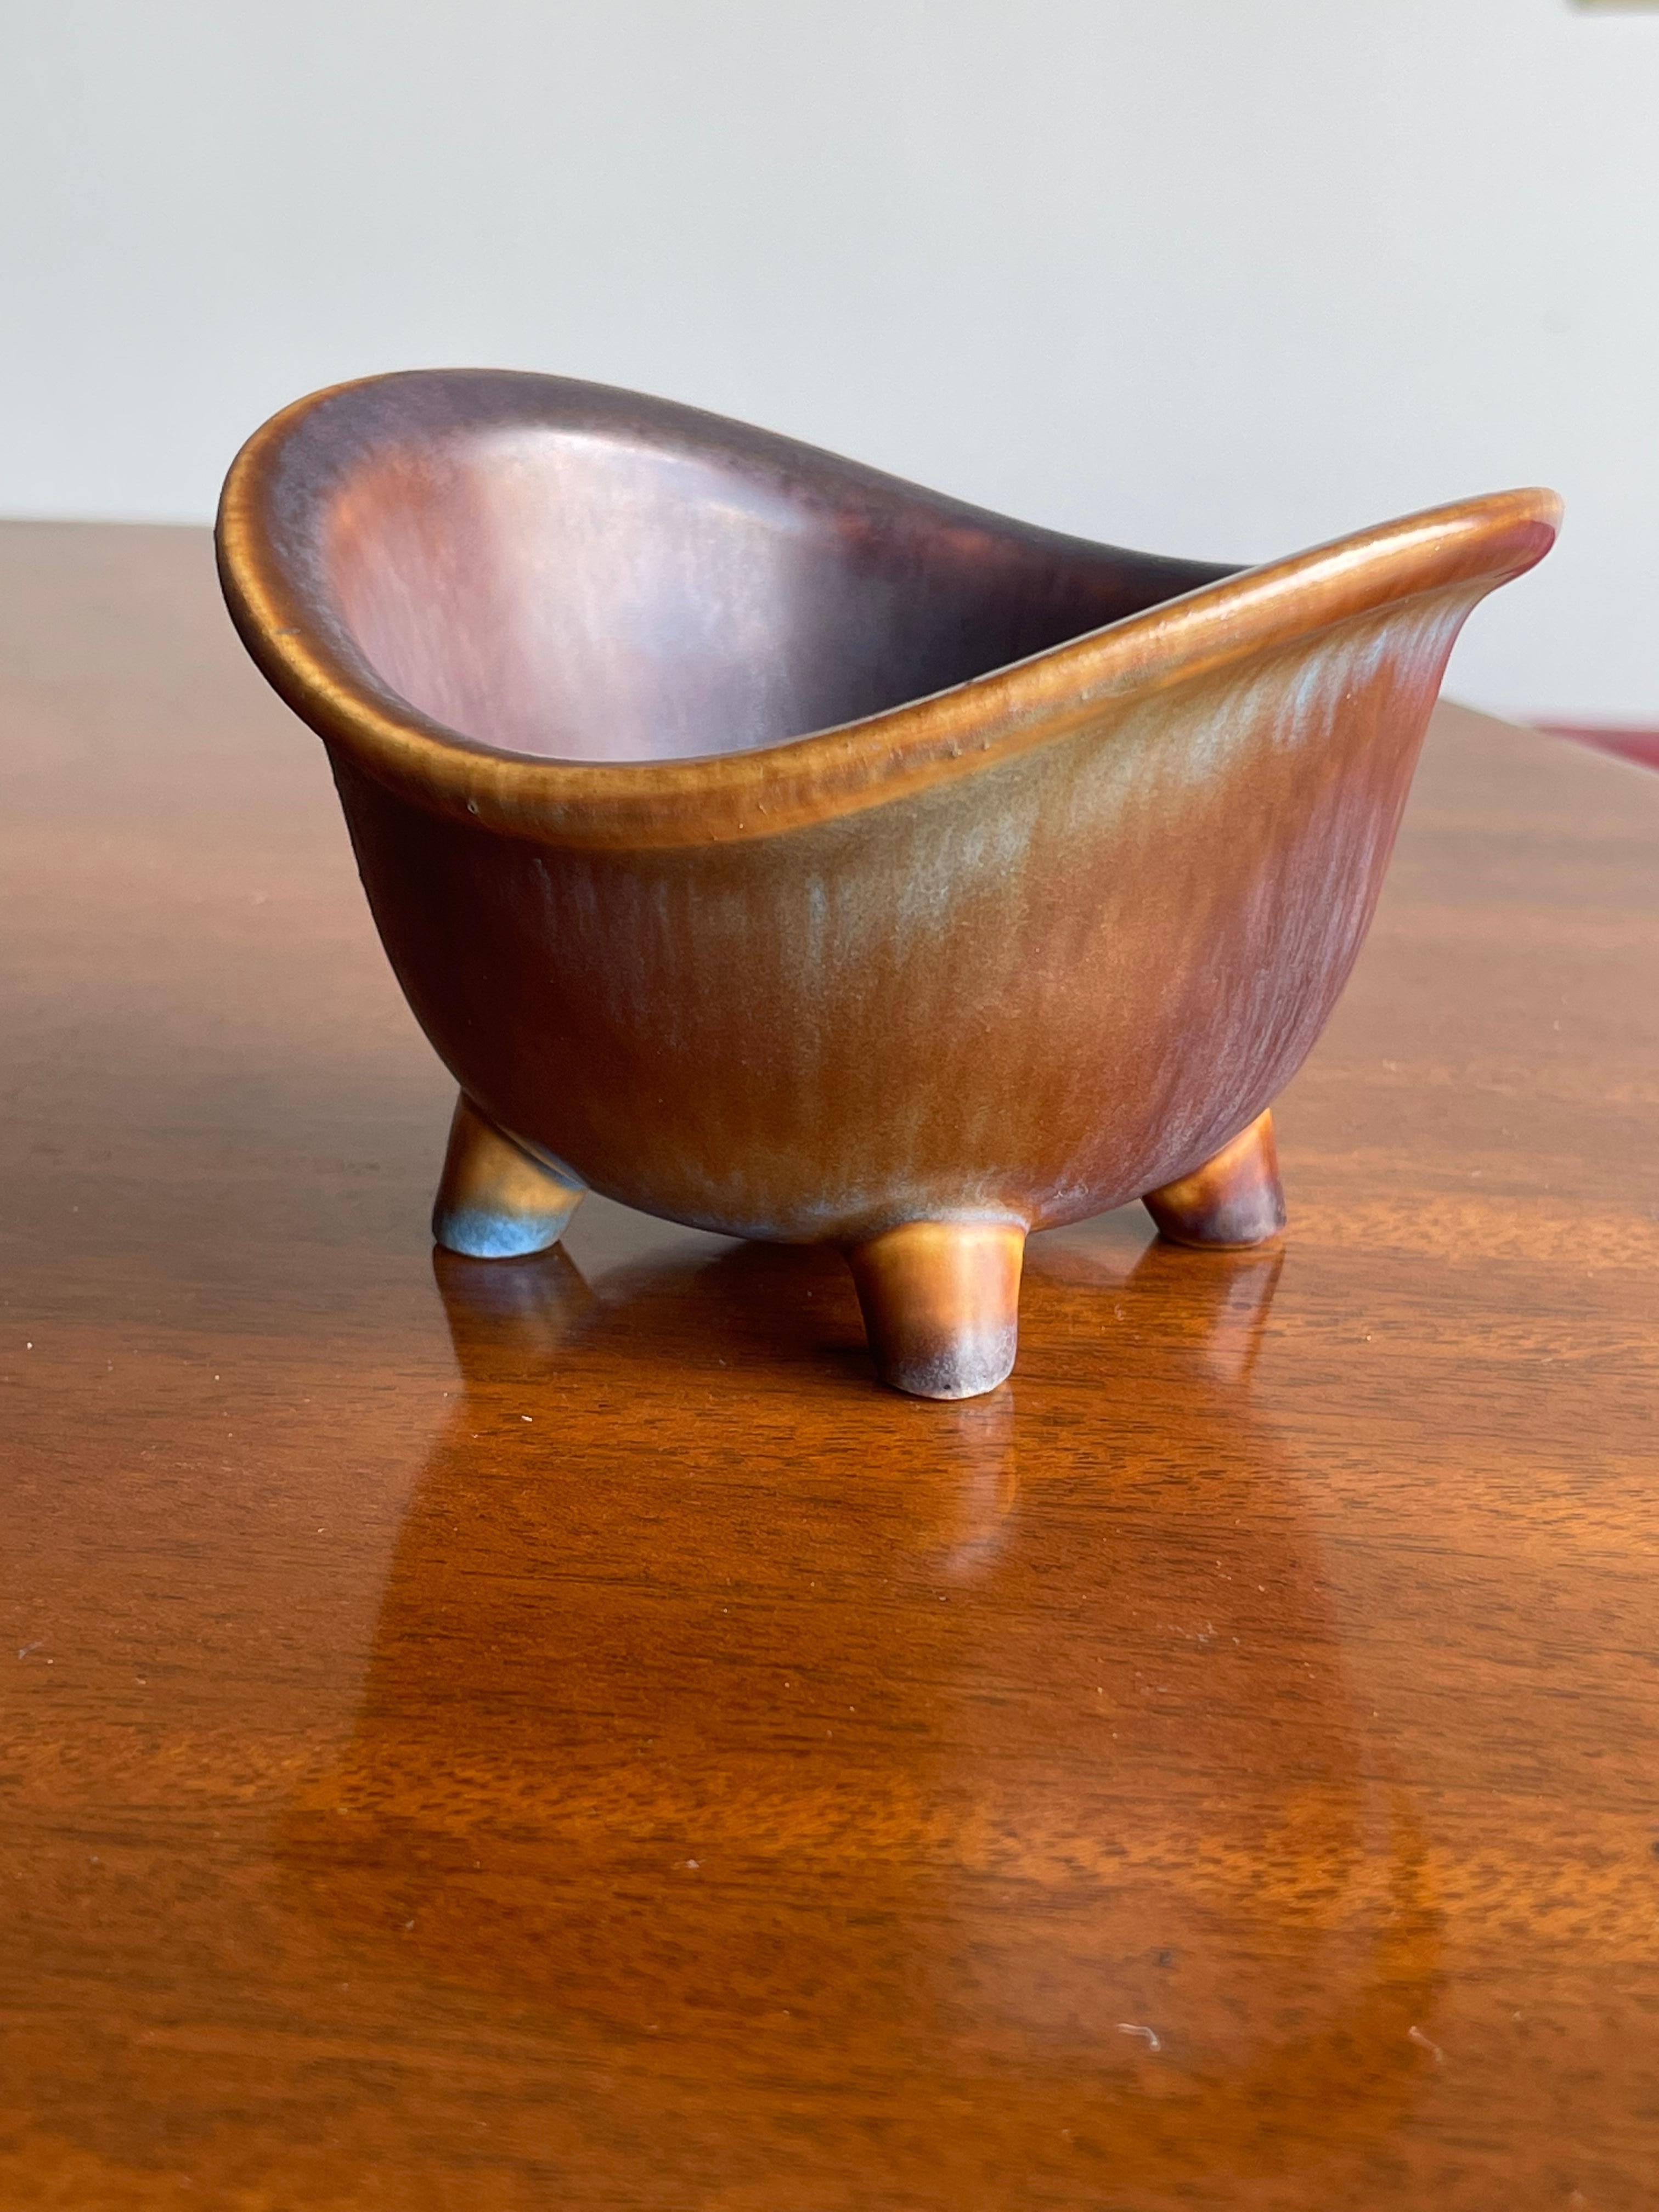 Rare footed bowl designed by Gunnar Nylund for Rörstrand. Wonderful glaze with a amber body and tones of brown to blue. Unique design with footed base. Signed on underside with the 